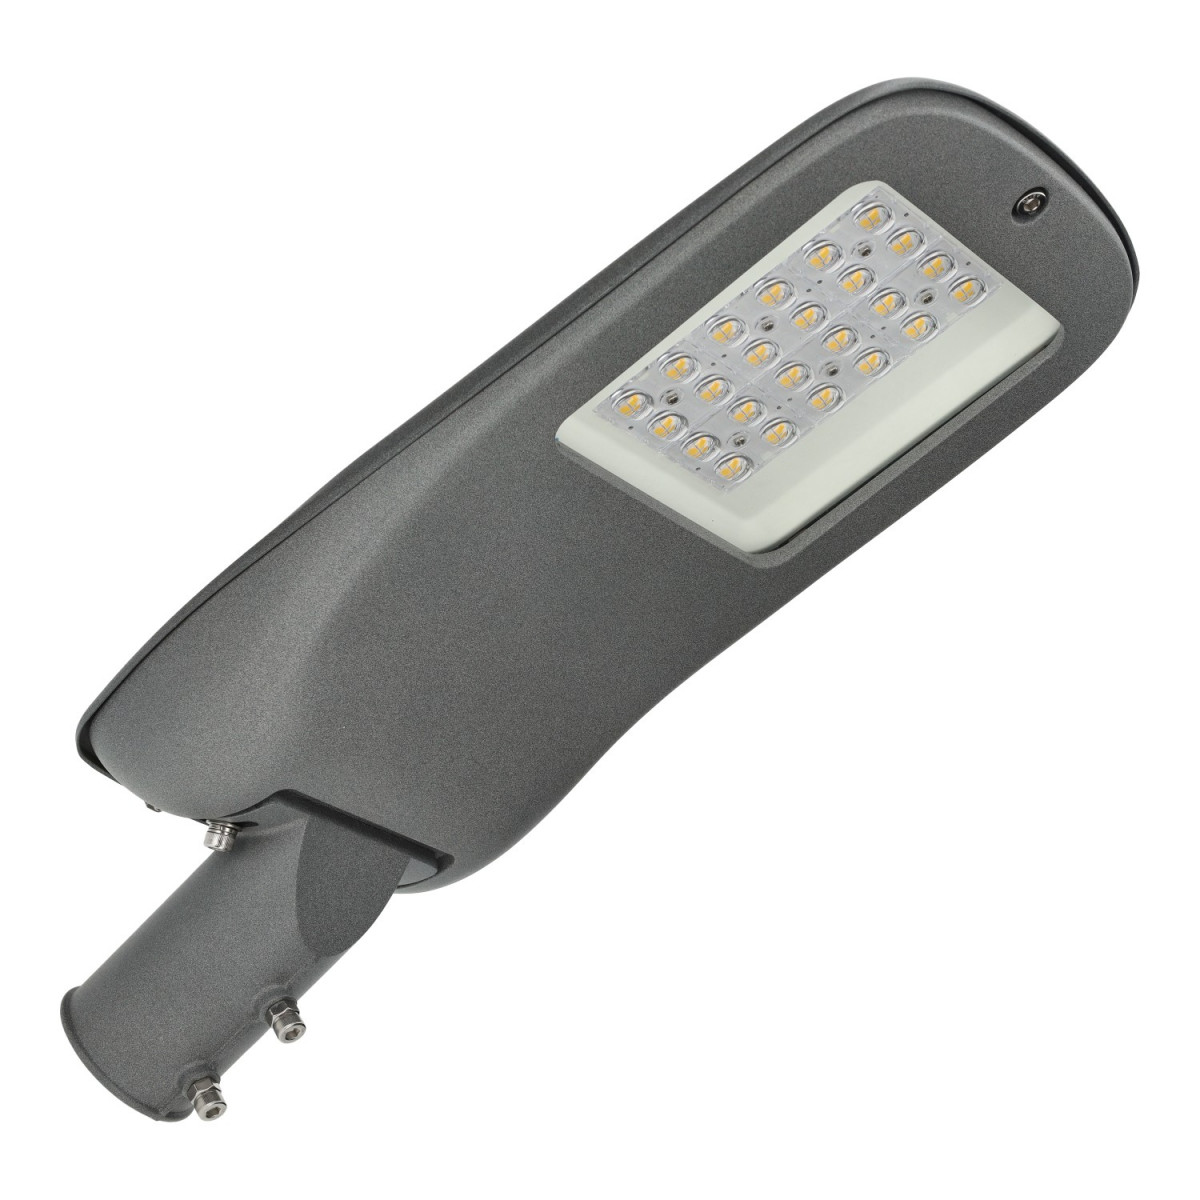 100W LED STREETLIGHT PHILIPS - MEAN WELL